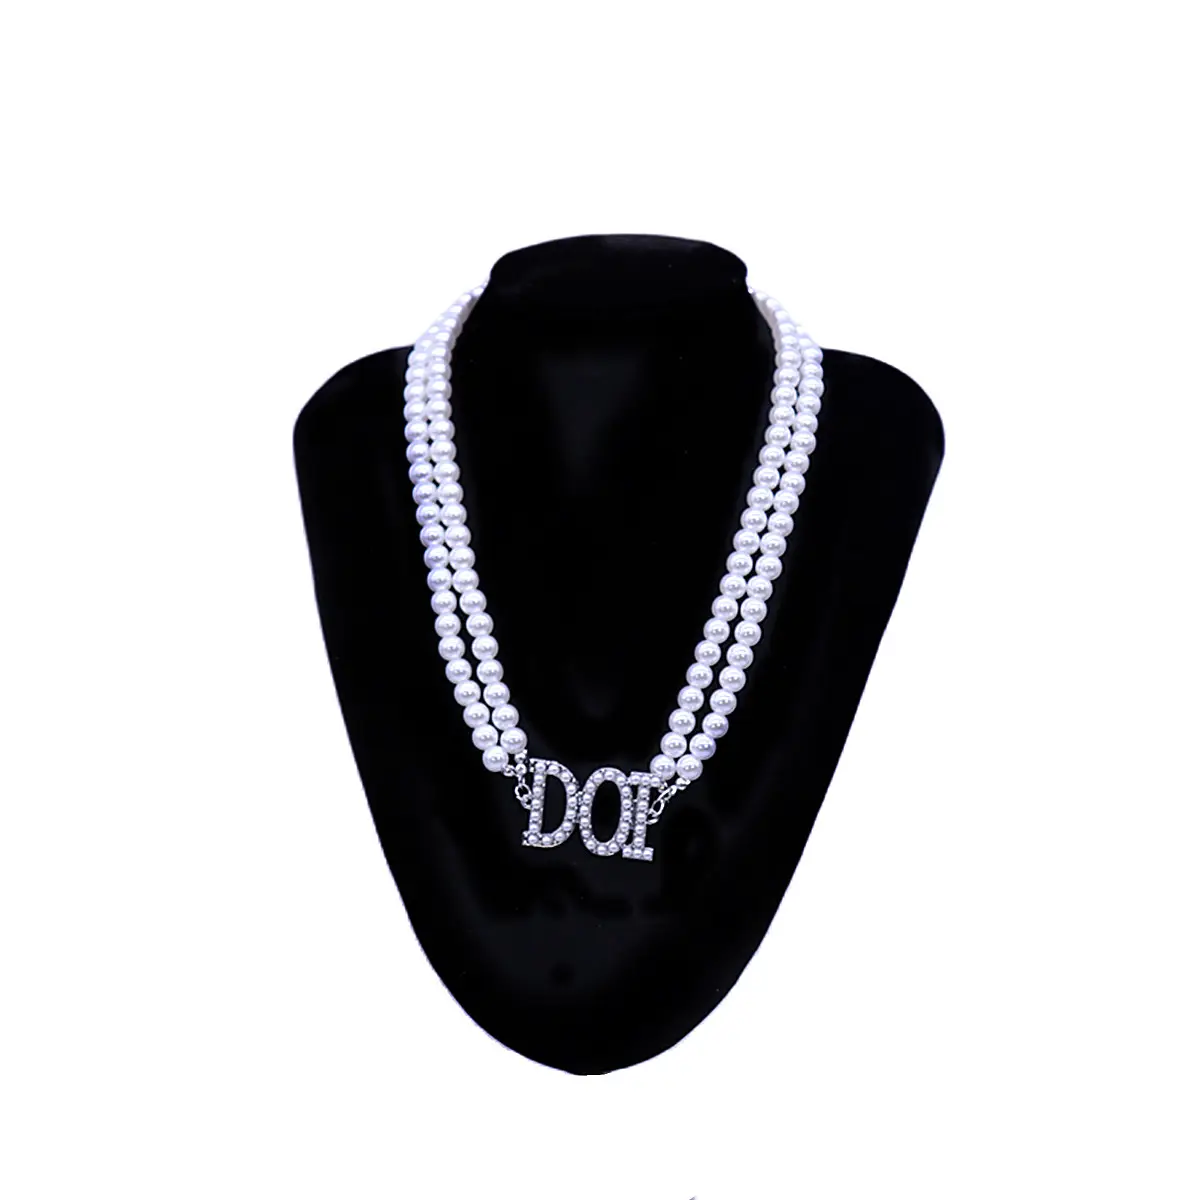 Low Price Custom Personality Multi Pearl Necklace Letter Charms DOI Daughter Of Isis Pretty Girl Exclusive Necklaces